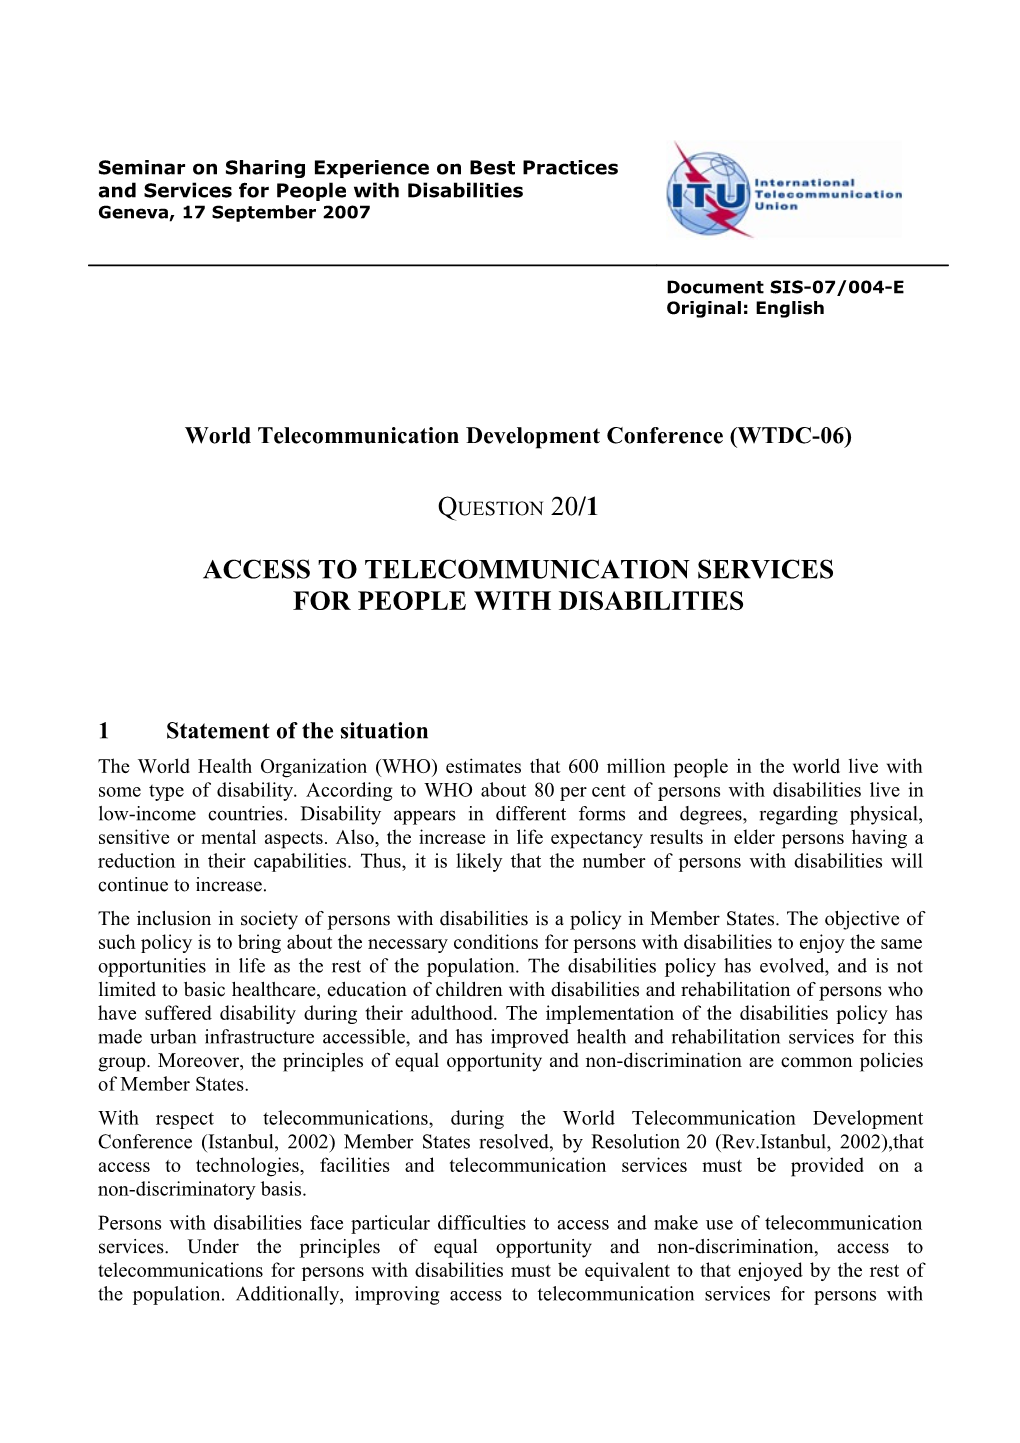 Access to Telecommunication Services